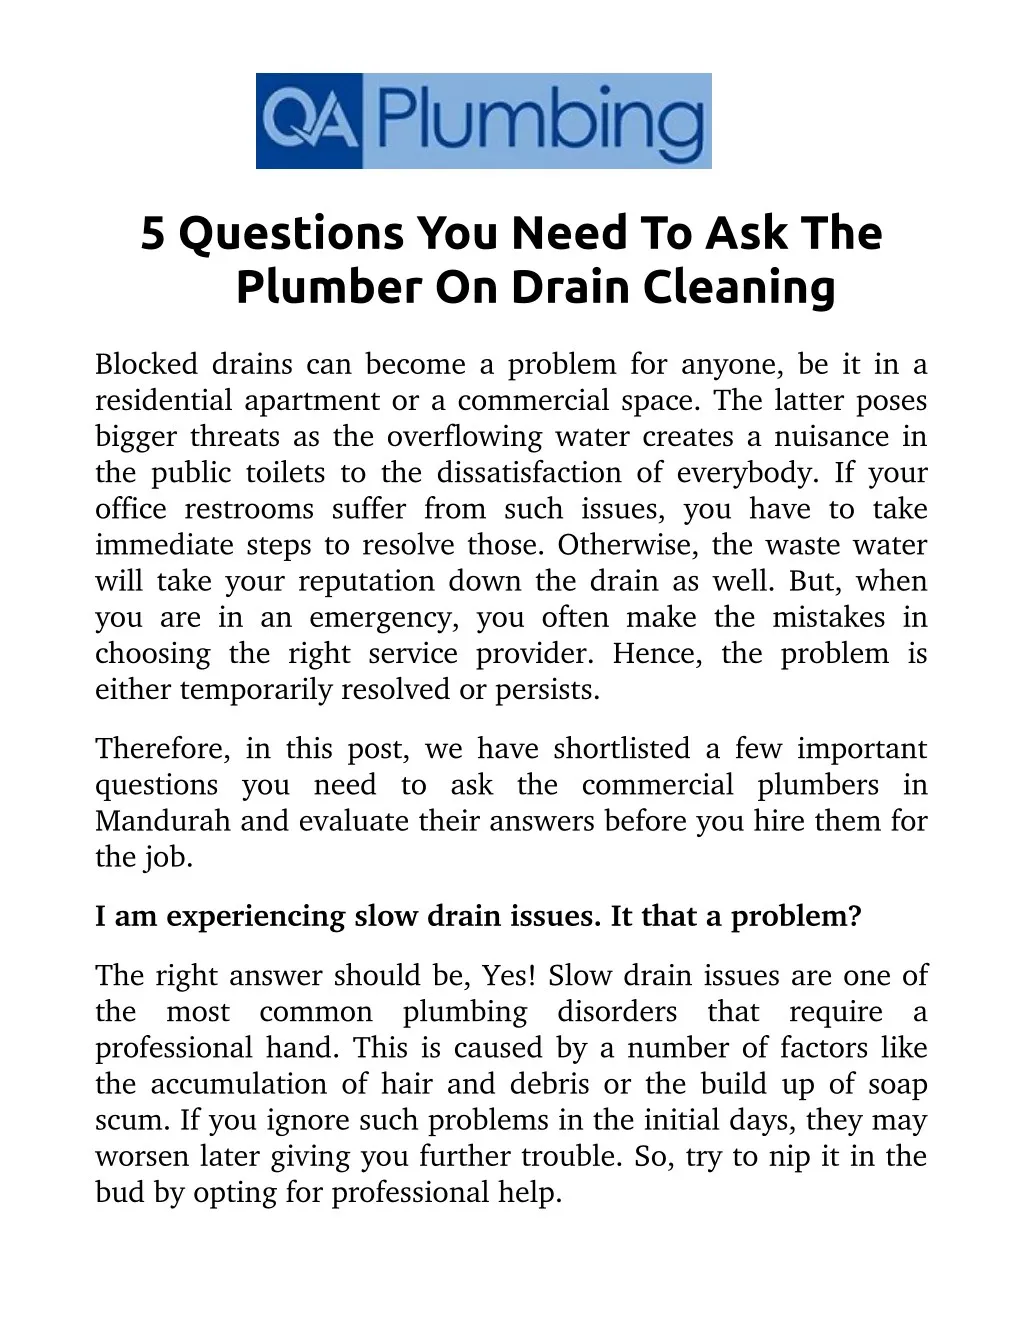 PPT - 5 Questions You Need To Ask The Plumber On Drain Cleaning